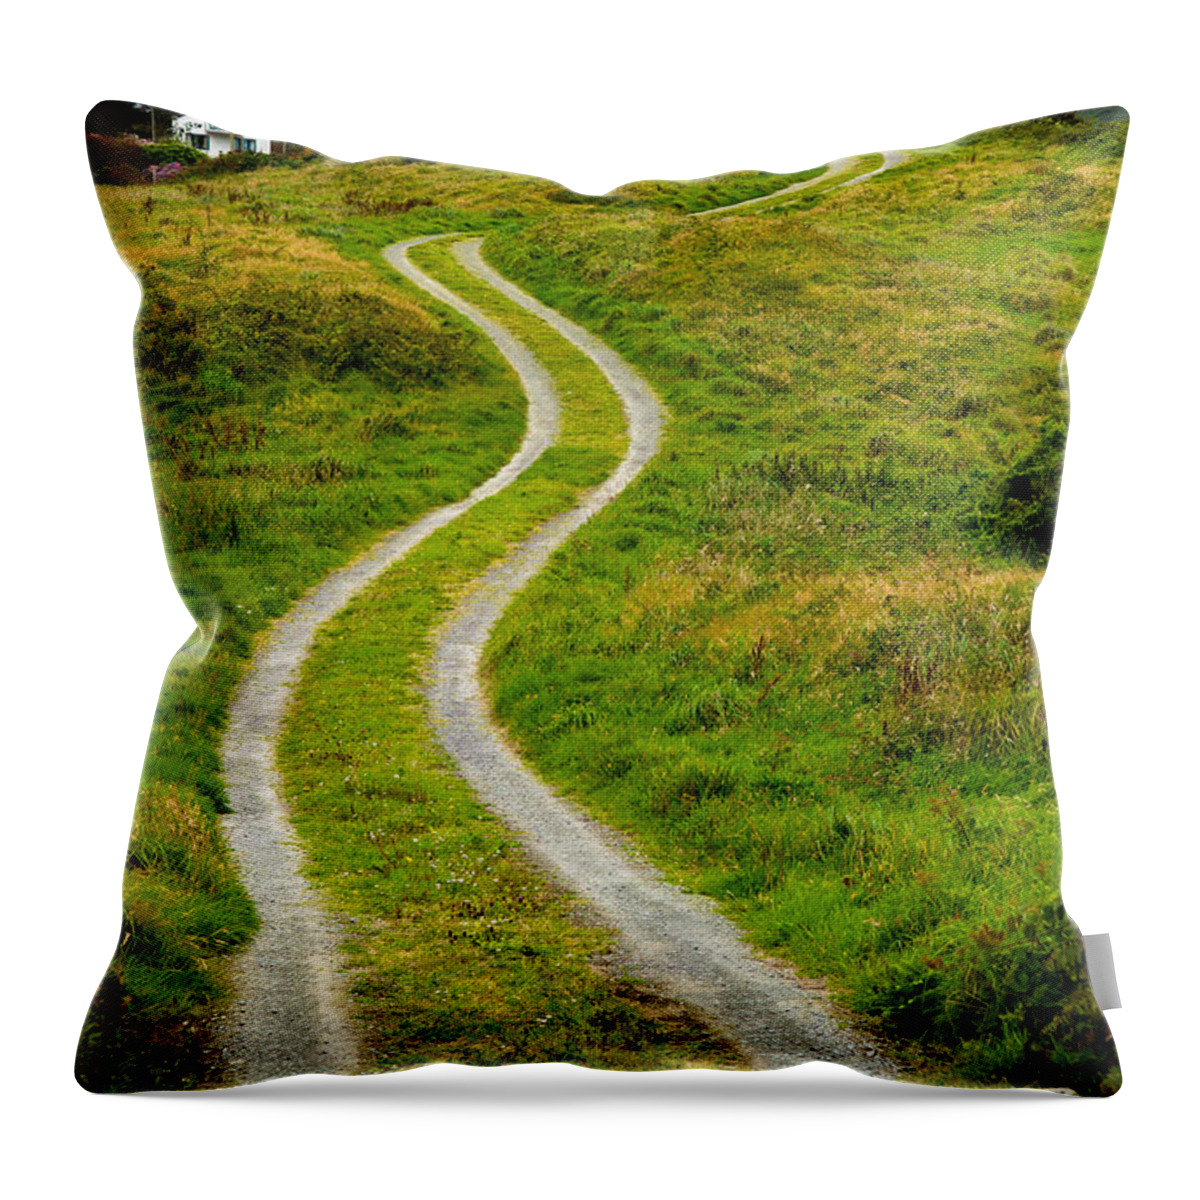 Photography Throw Pillow featuring the photograph Single Track Gravel Road upon a Hill by Andreas Berthold